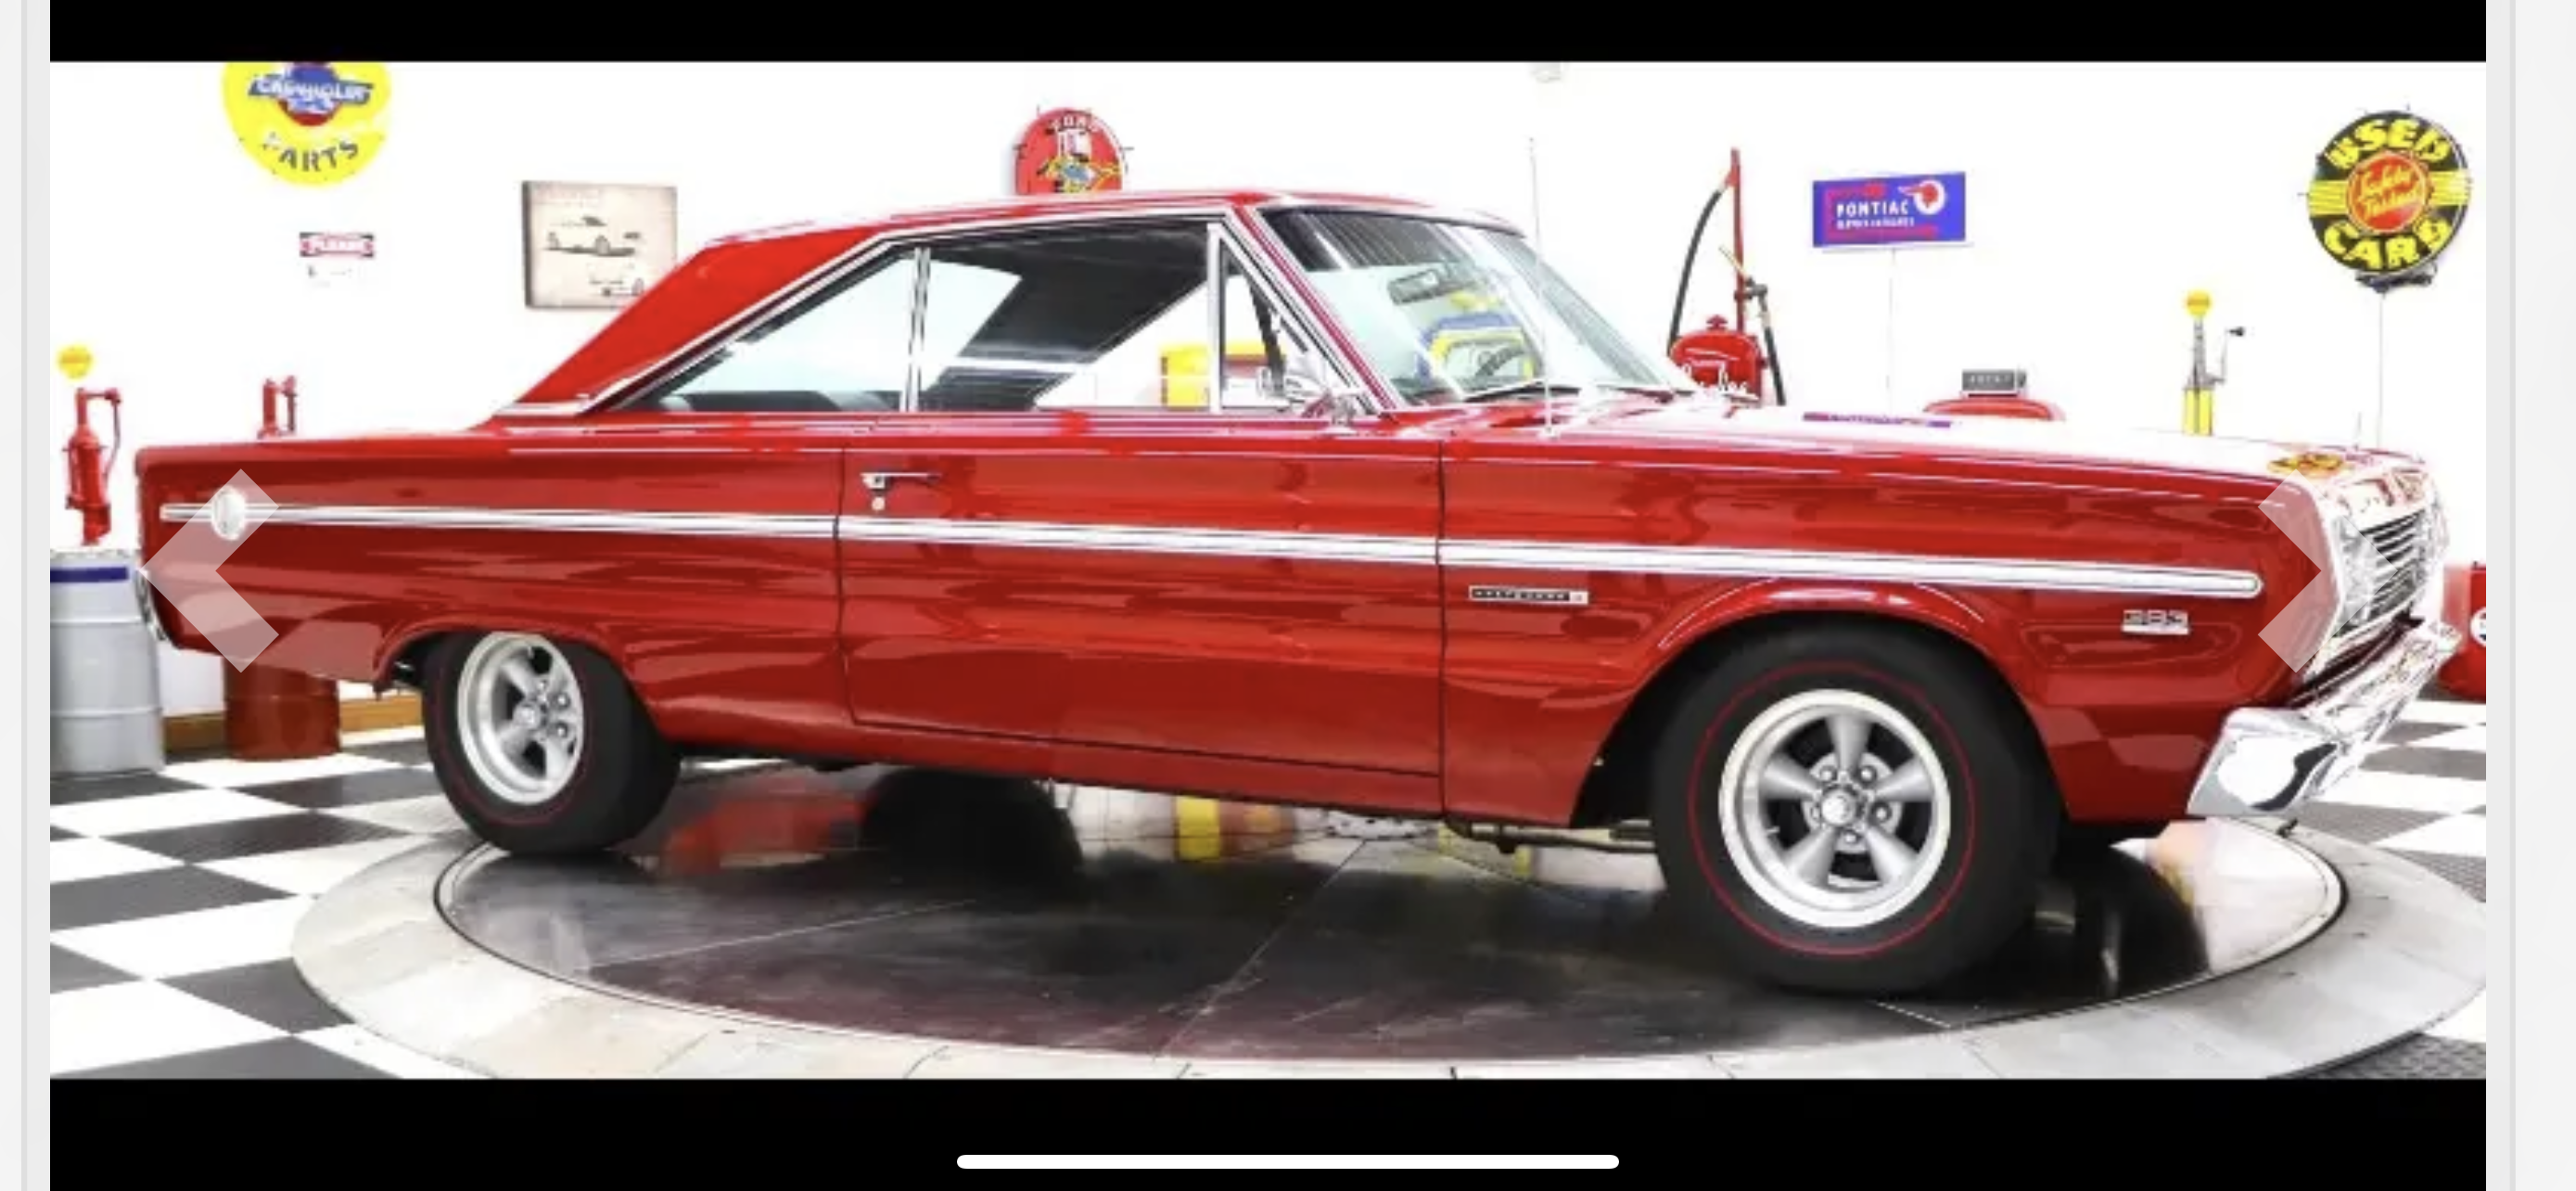 AJ's “Badass Friday” Car of the Day: 1966 Plymouth Belvedere II